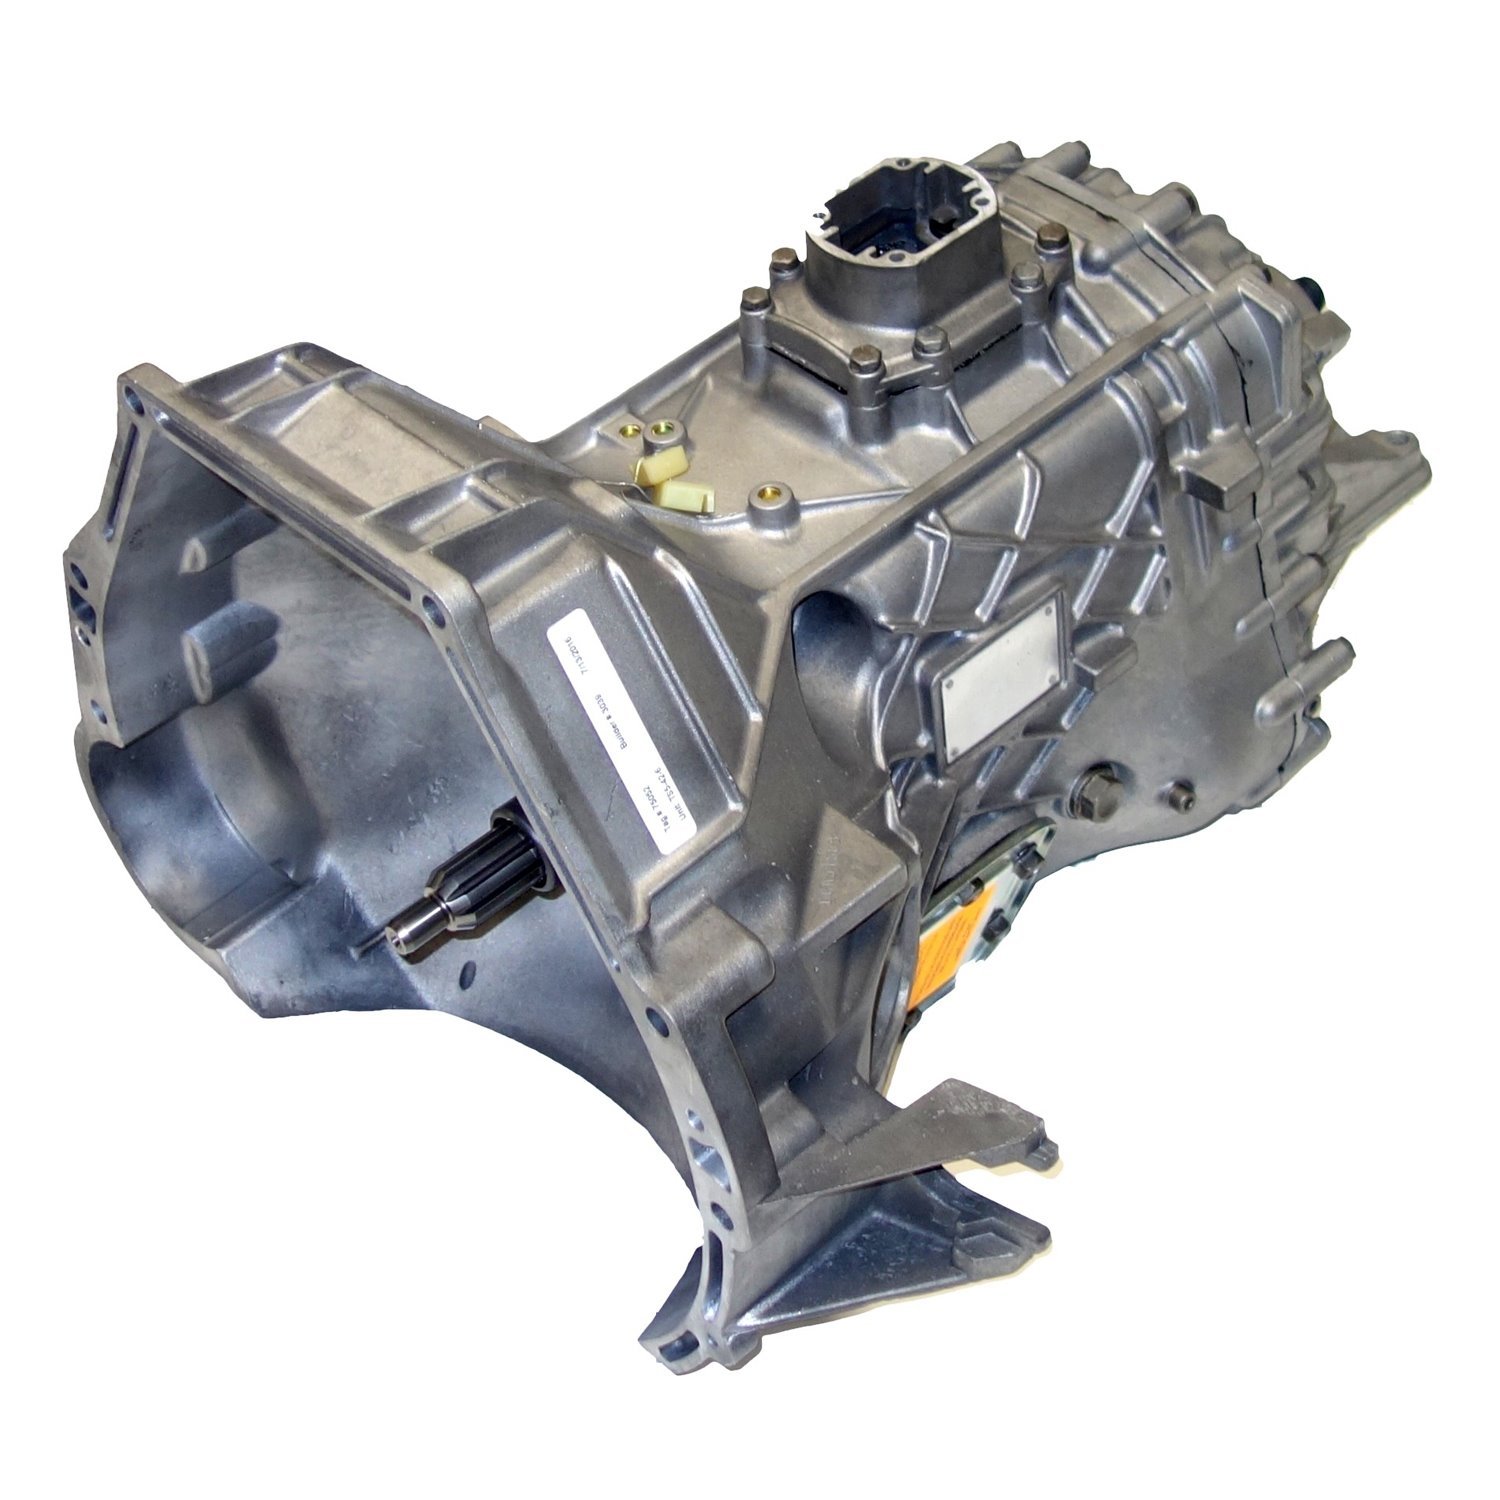 Remanufactured S5-42 Manual Transmission for Ford 87-92 F-series 6.9L & 7.3L, 5 Speed